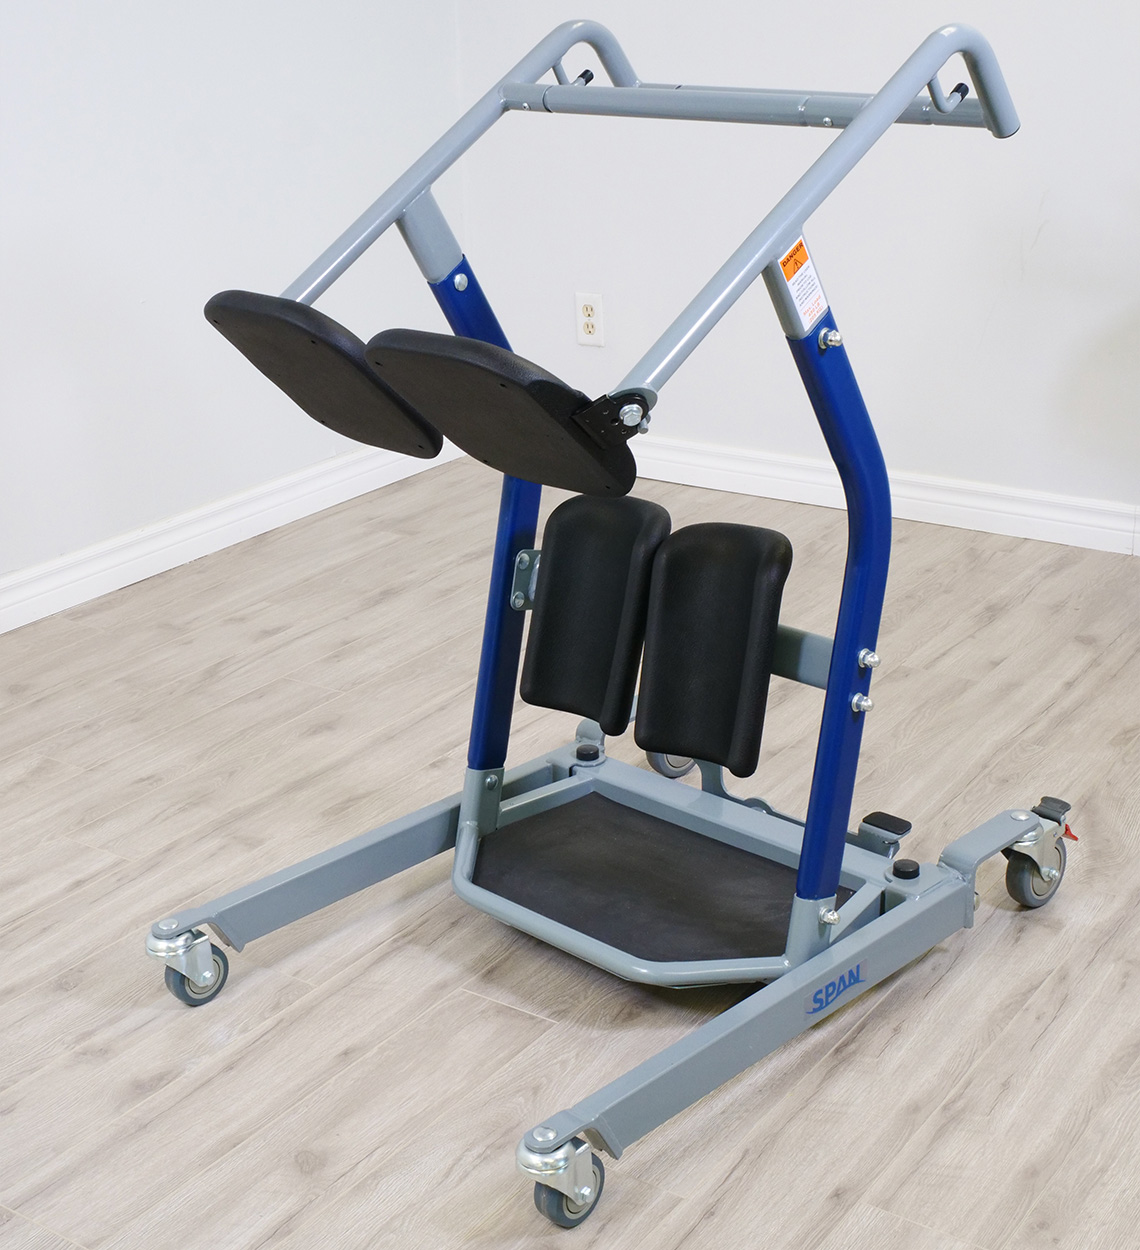 A sit-to-stand lift